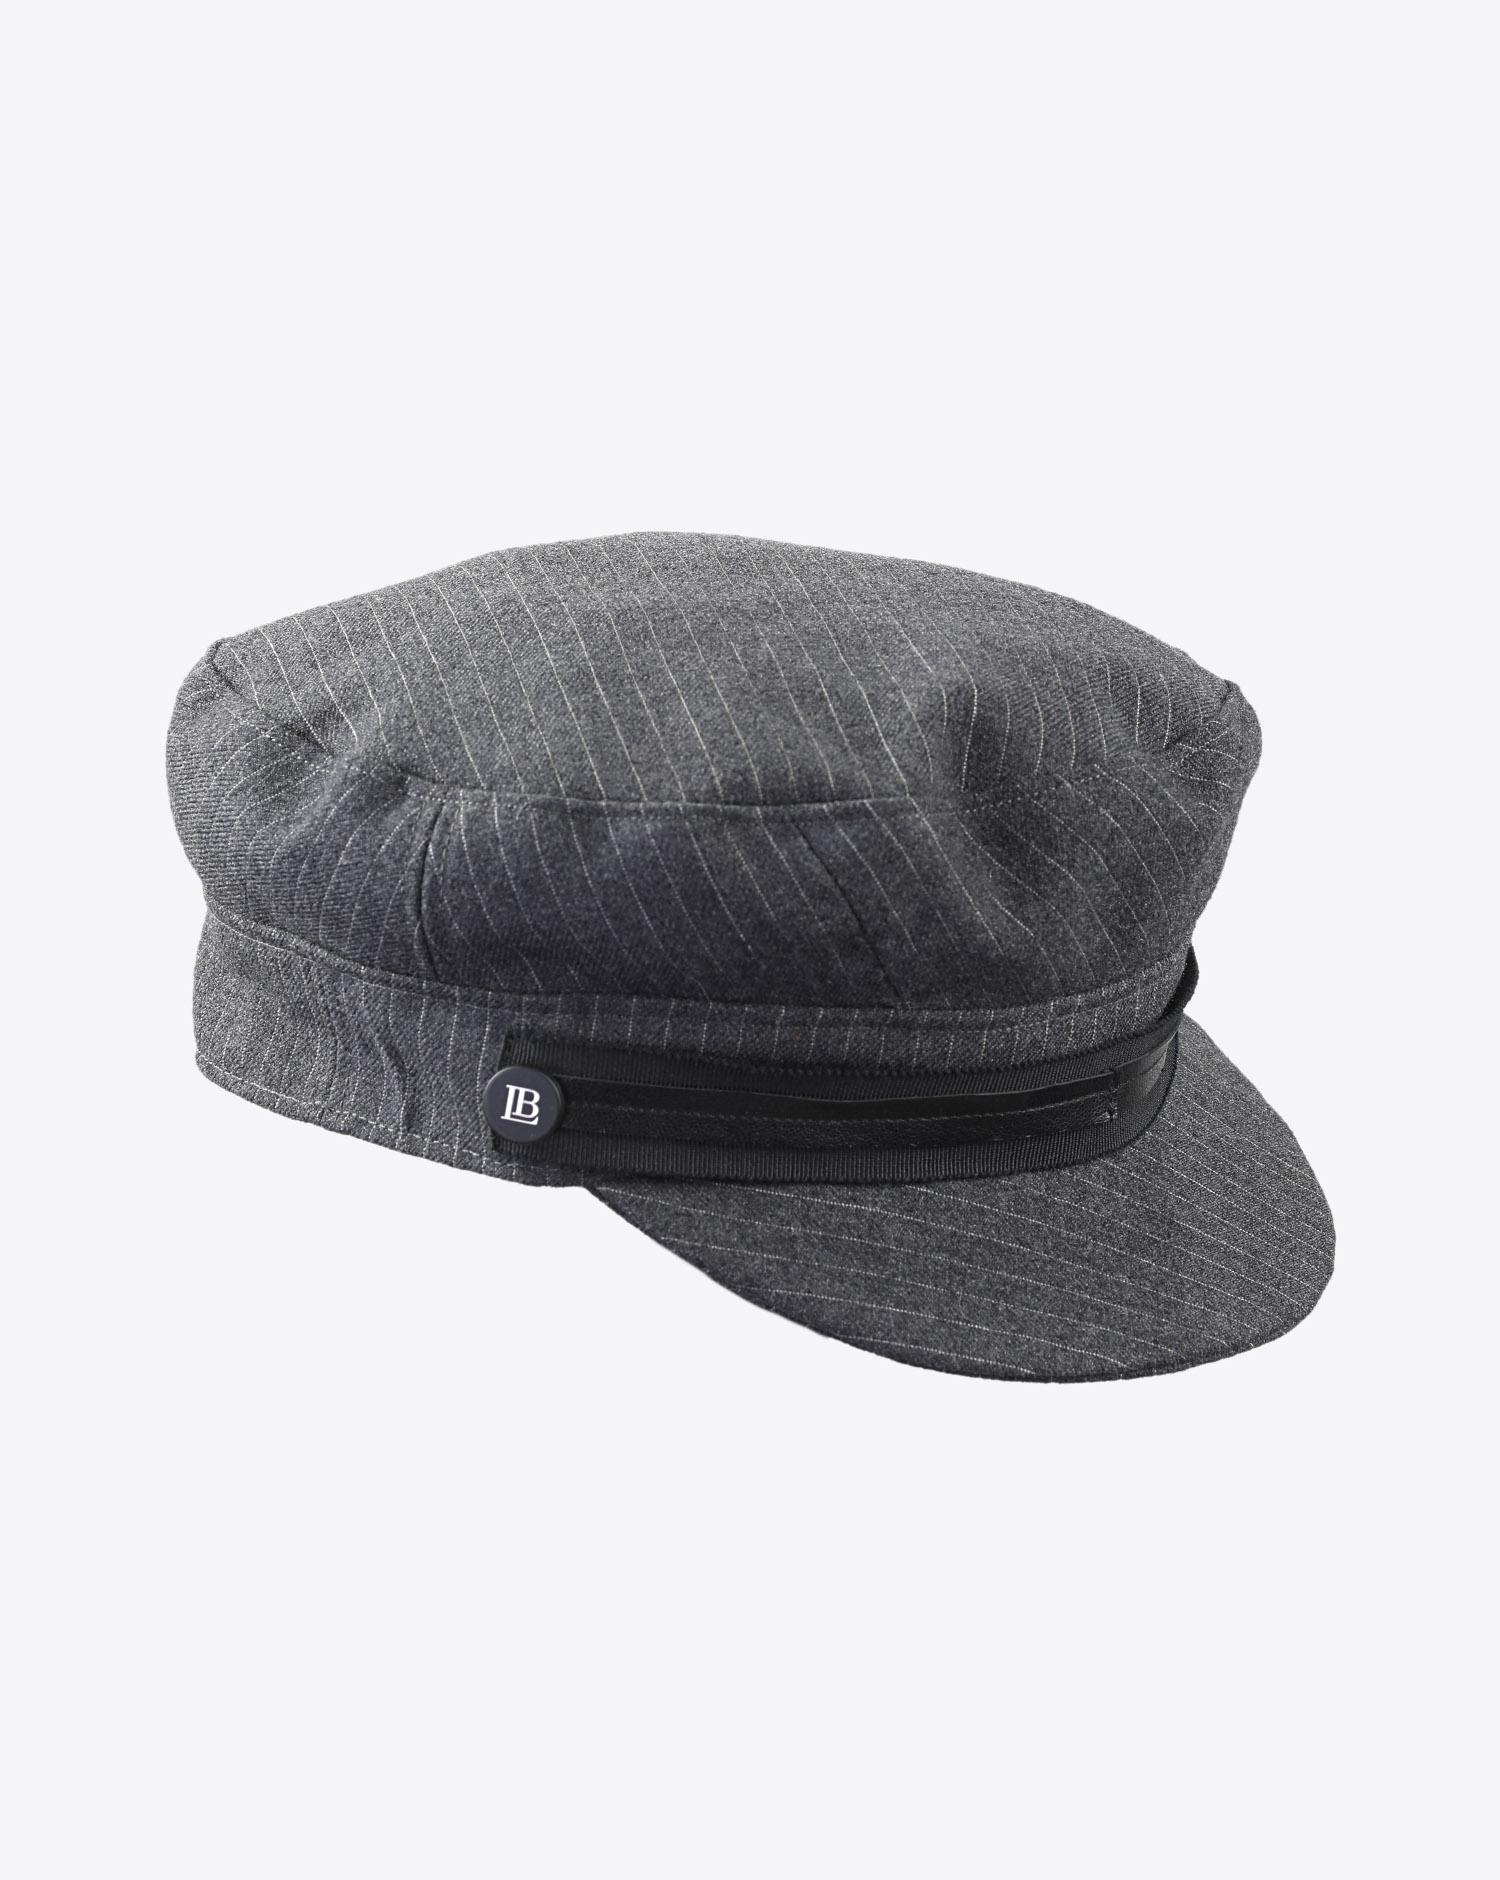 Laurence Bossion Casquette tissu vintage masculin - Gris  